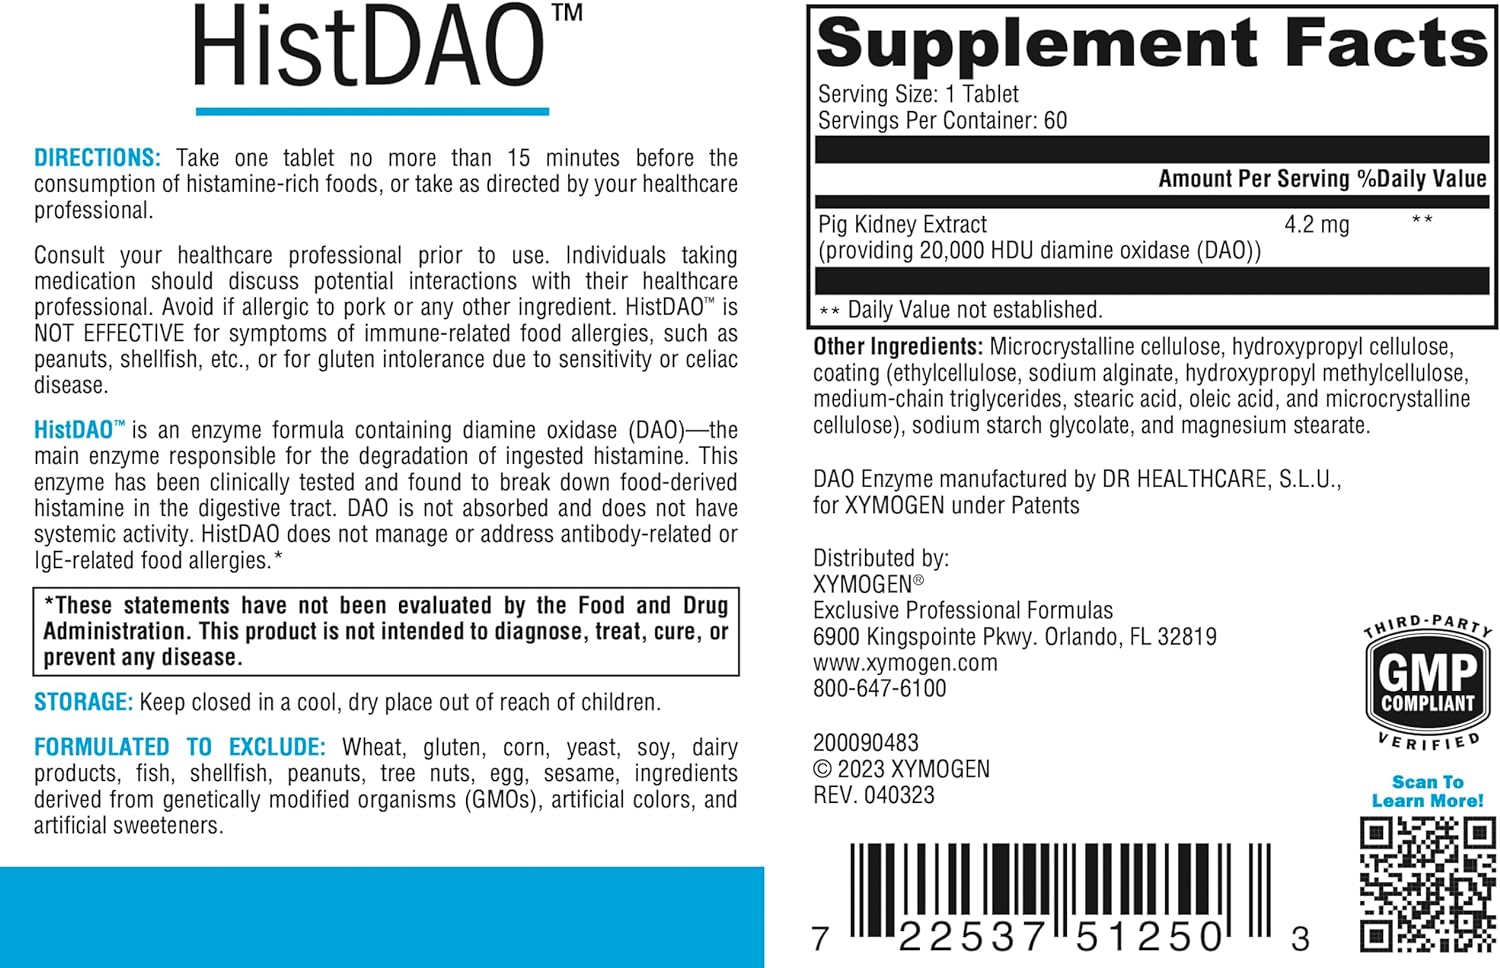 XYMOGEN HistDAO - DAO Enzyme Supplement to Supports Healthy Degradatio